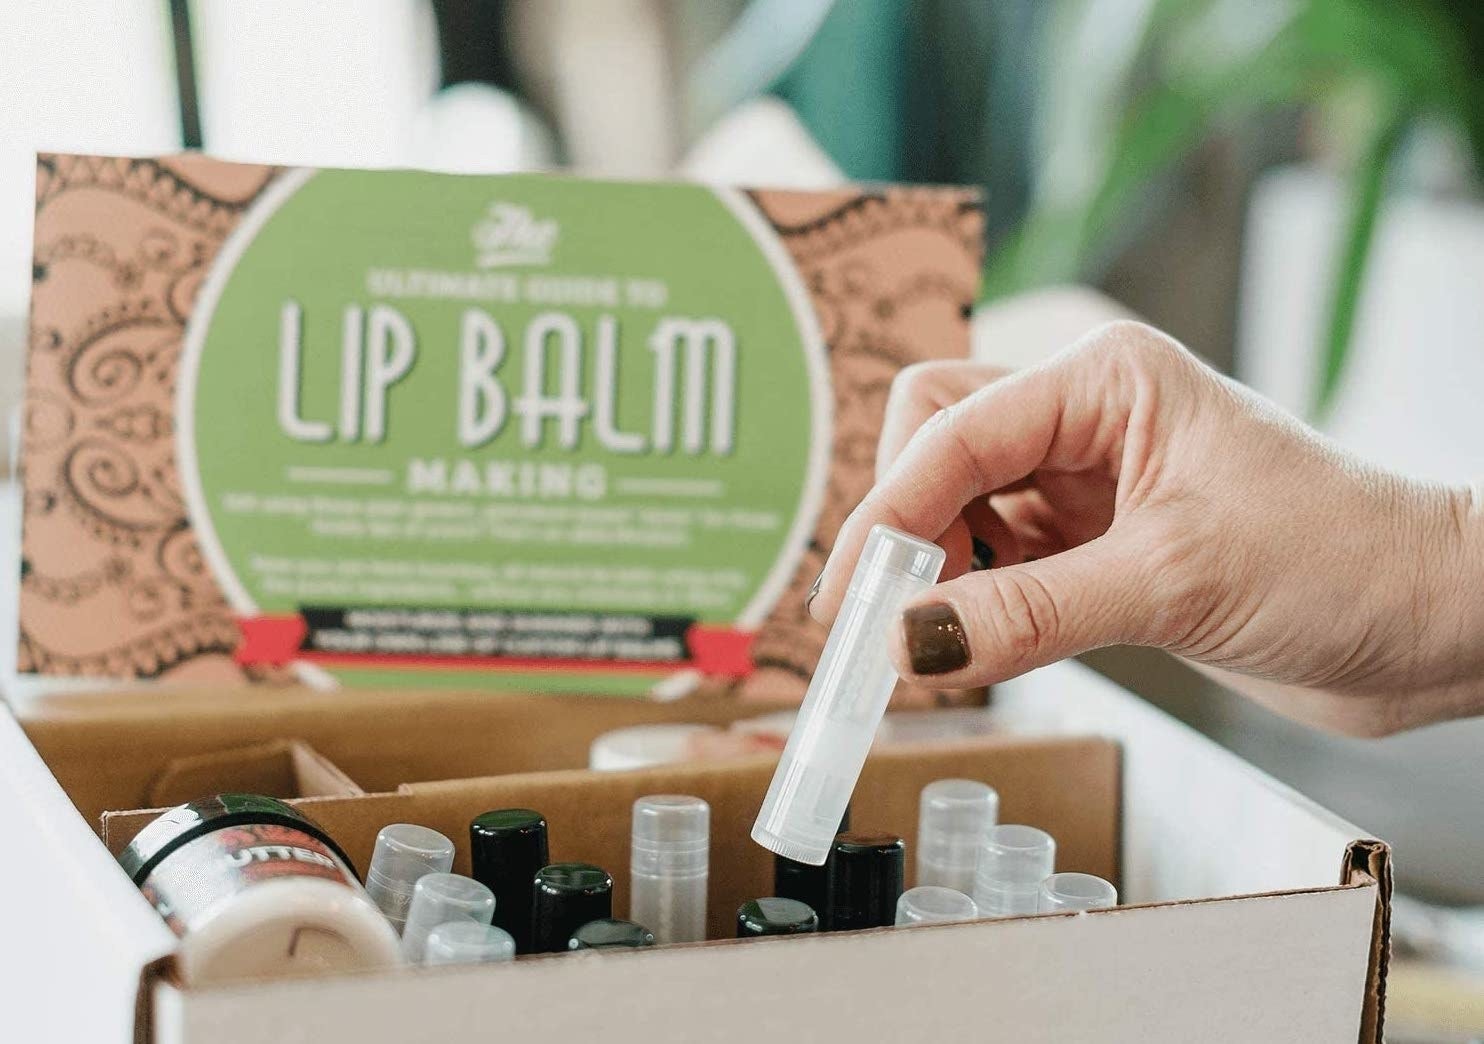 A hand removes a tube from the balm making kit